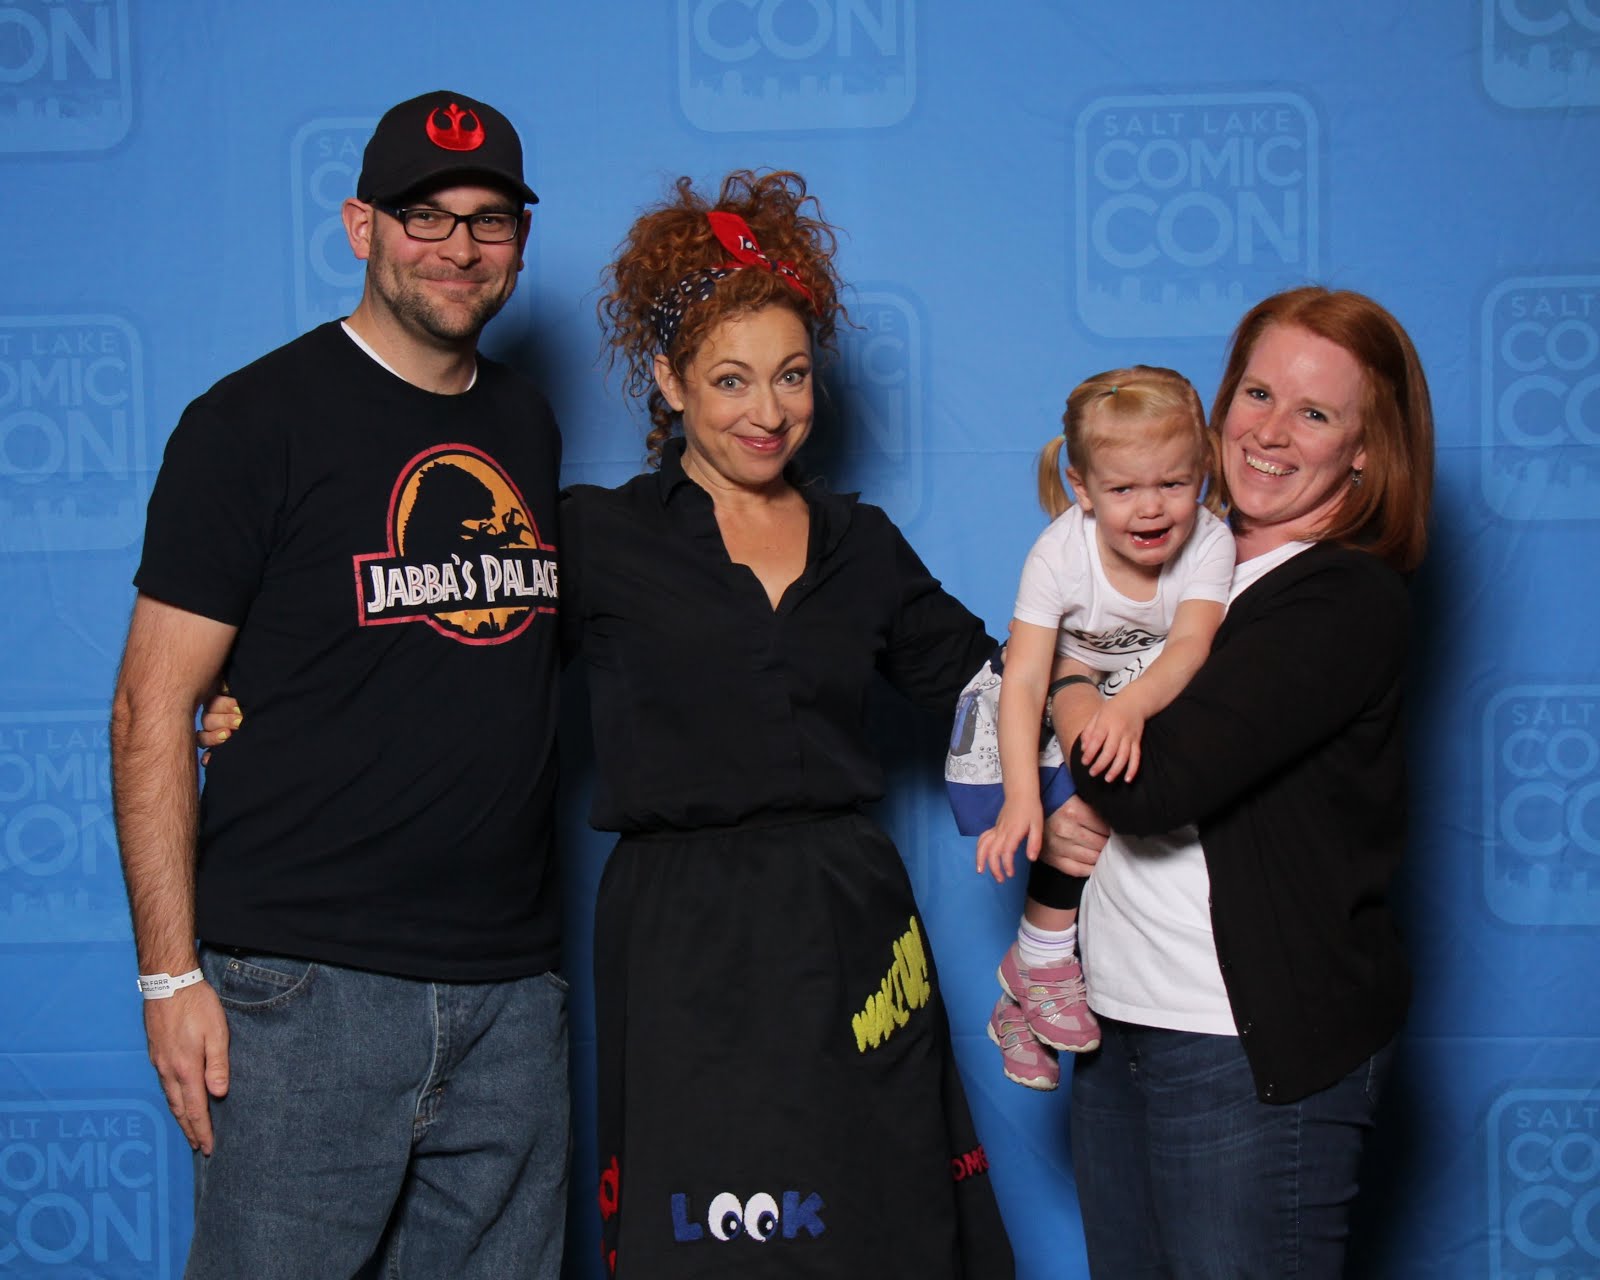 Us and Alex Kingston